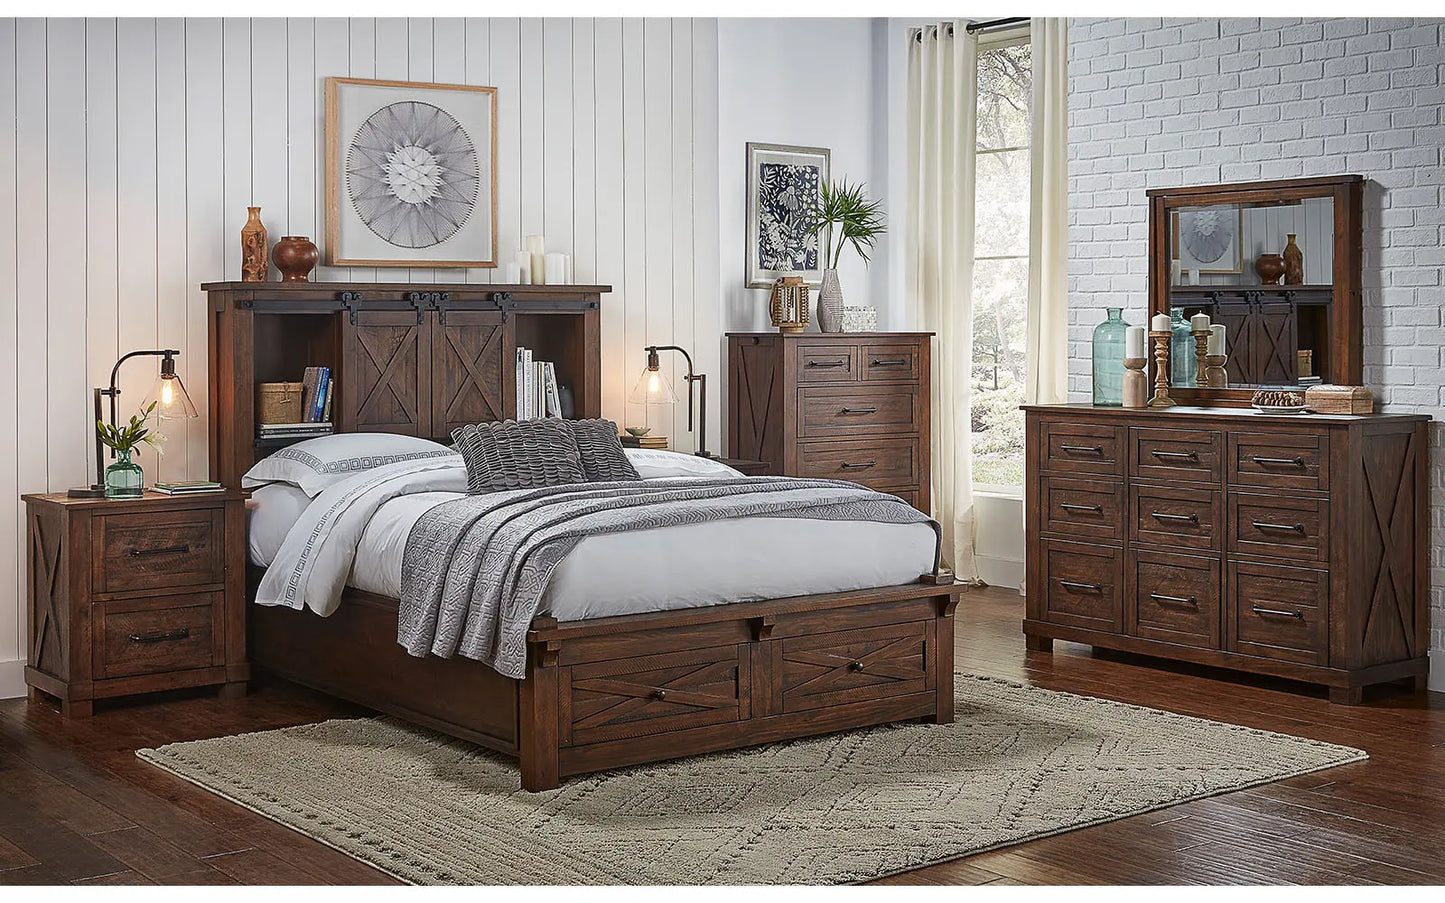 Sun Valley Rustic Timber Cal-King Storage Hdbr W/ Storage Footboard A-America